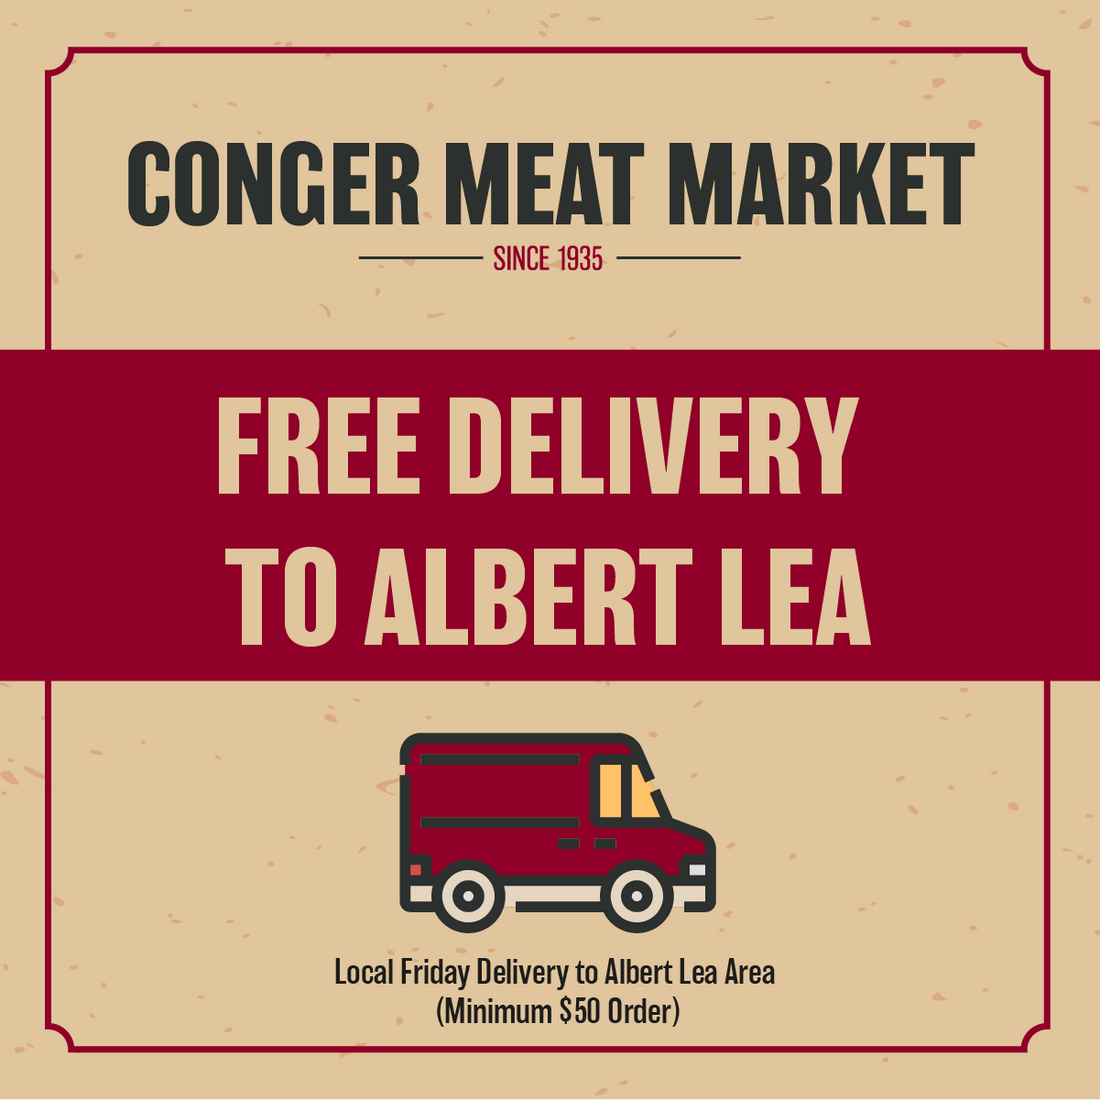 Free Local Delivery to Albert Lea, Minnesota Residents from Conger Meats | Conger Meat Market